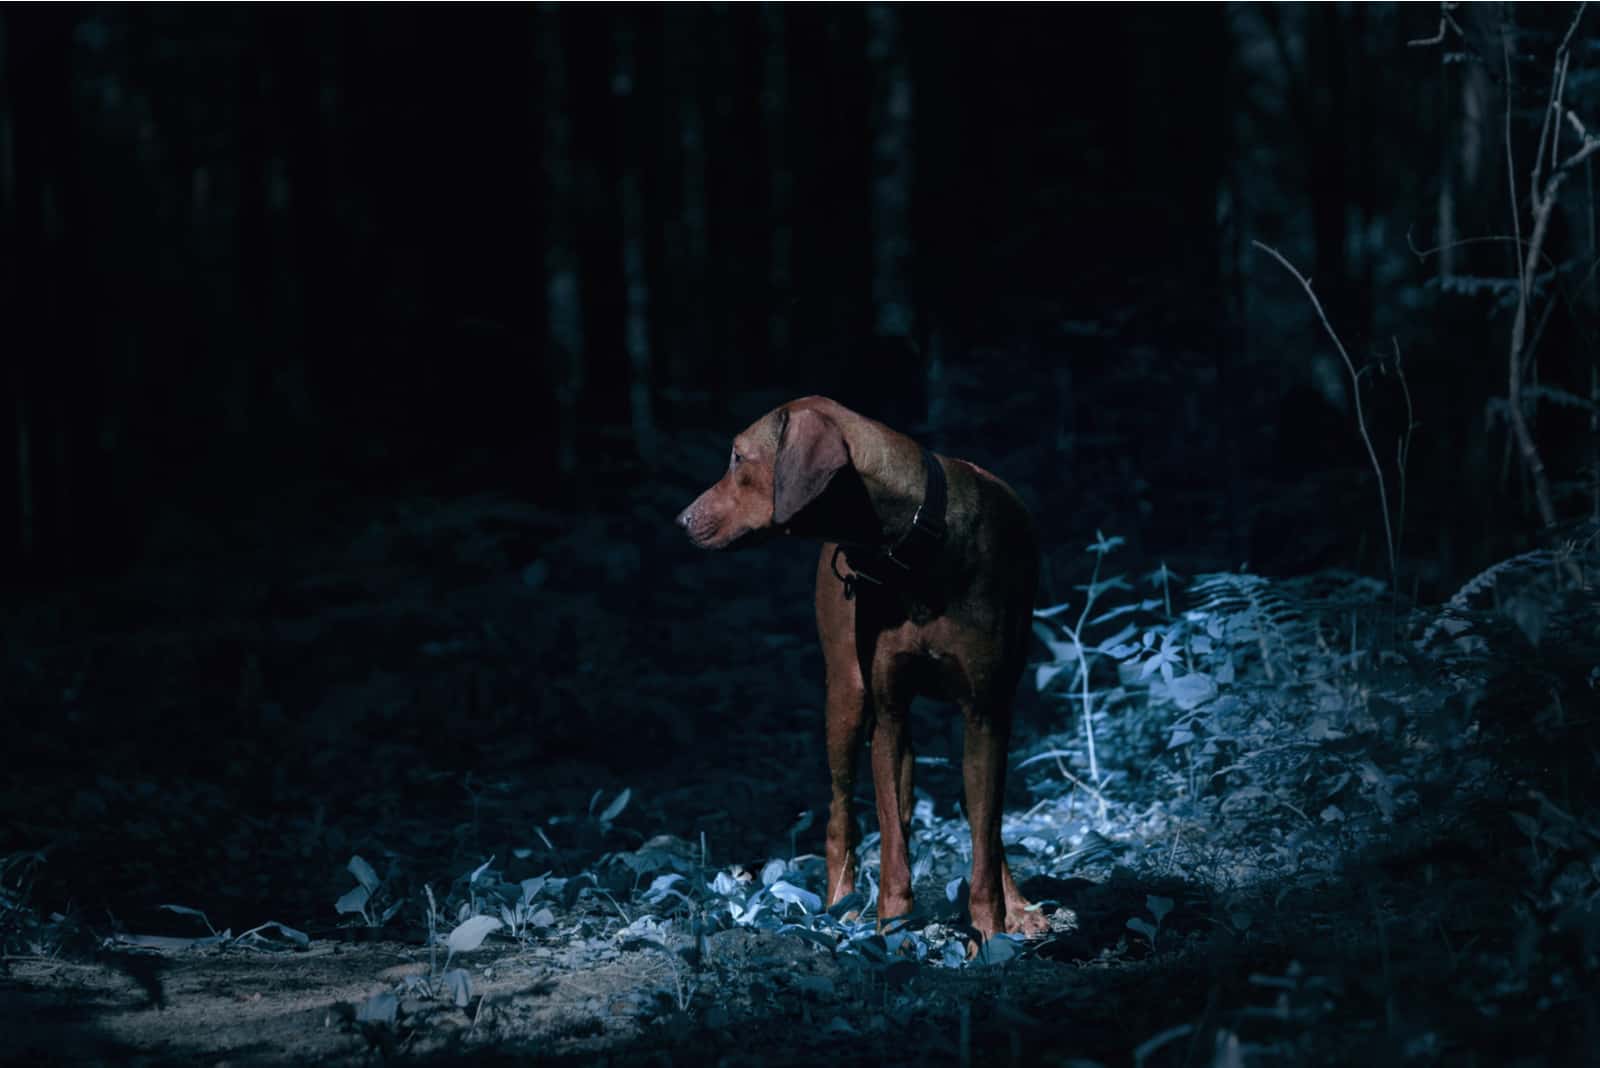 a hunting dog watches something in the woods in the evening